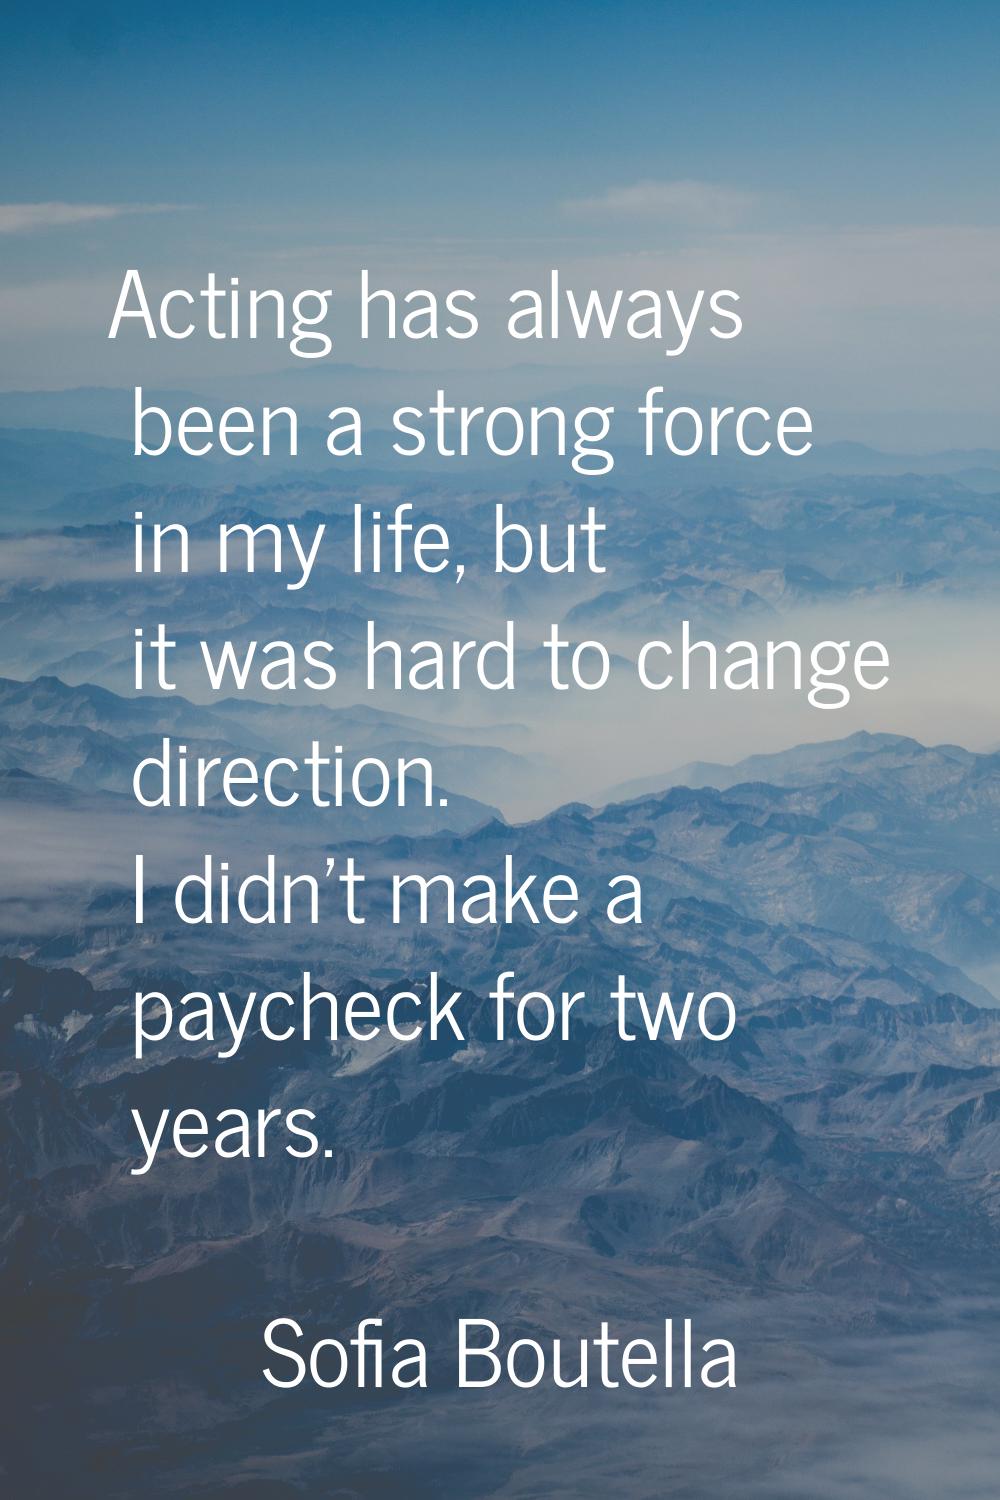 Acting has always been a strong force in my life, but it was hard to change direction. I didn't mak